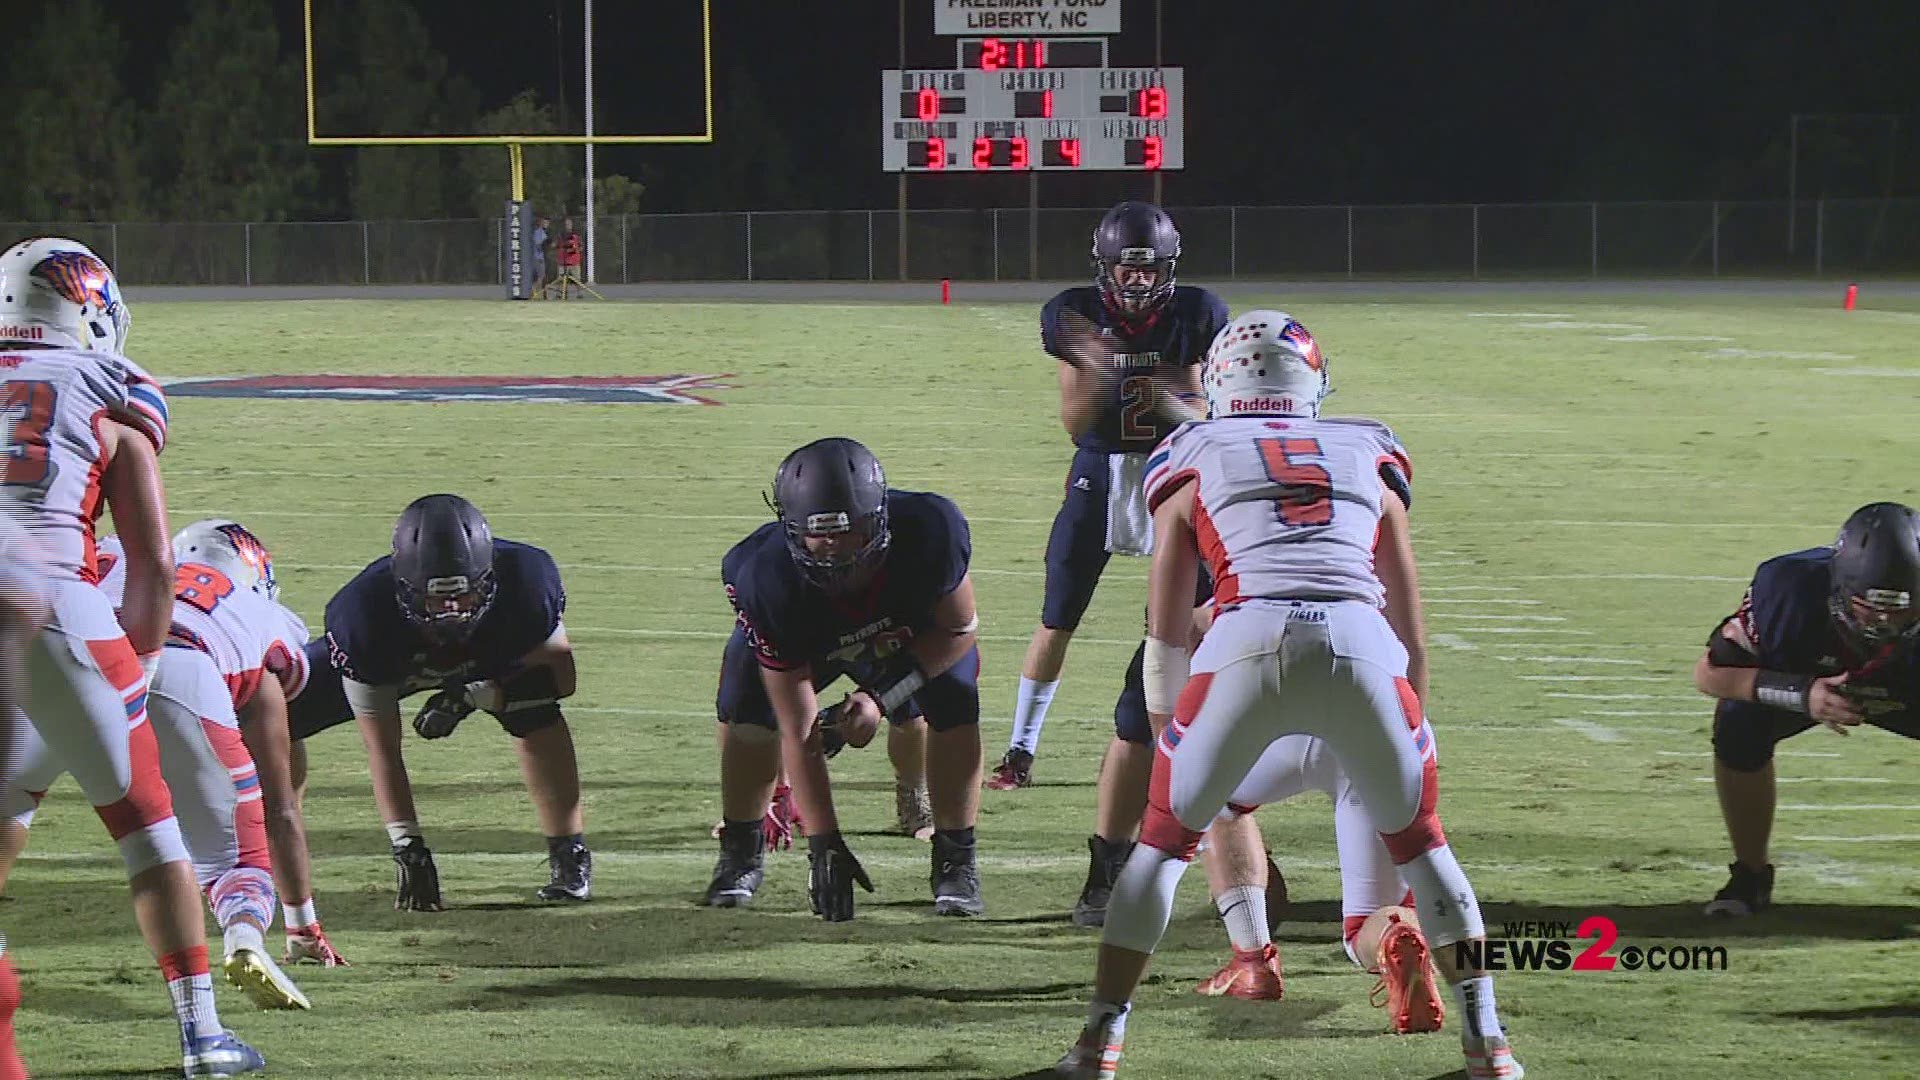 Week 7 saw Randleman top Providence Grove to remain undefeated on the season